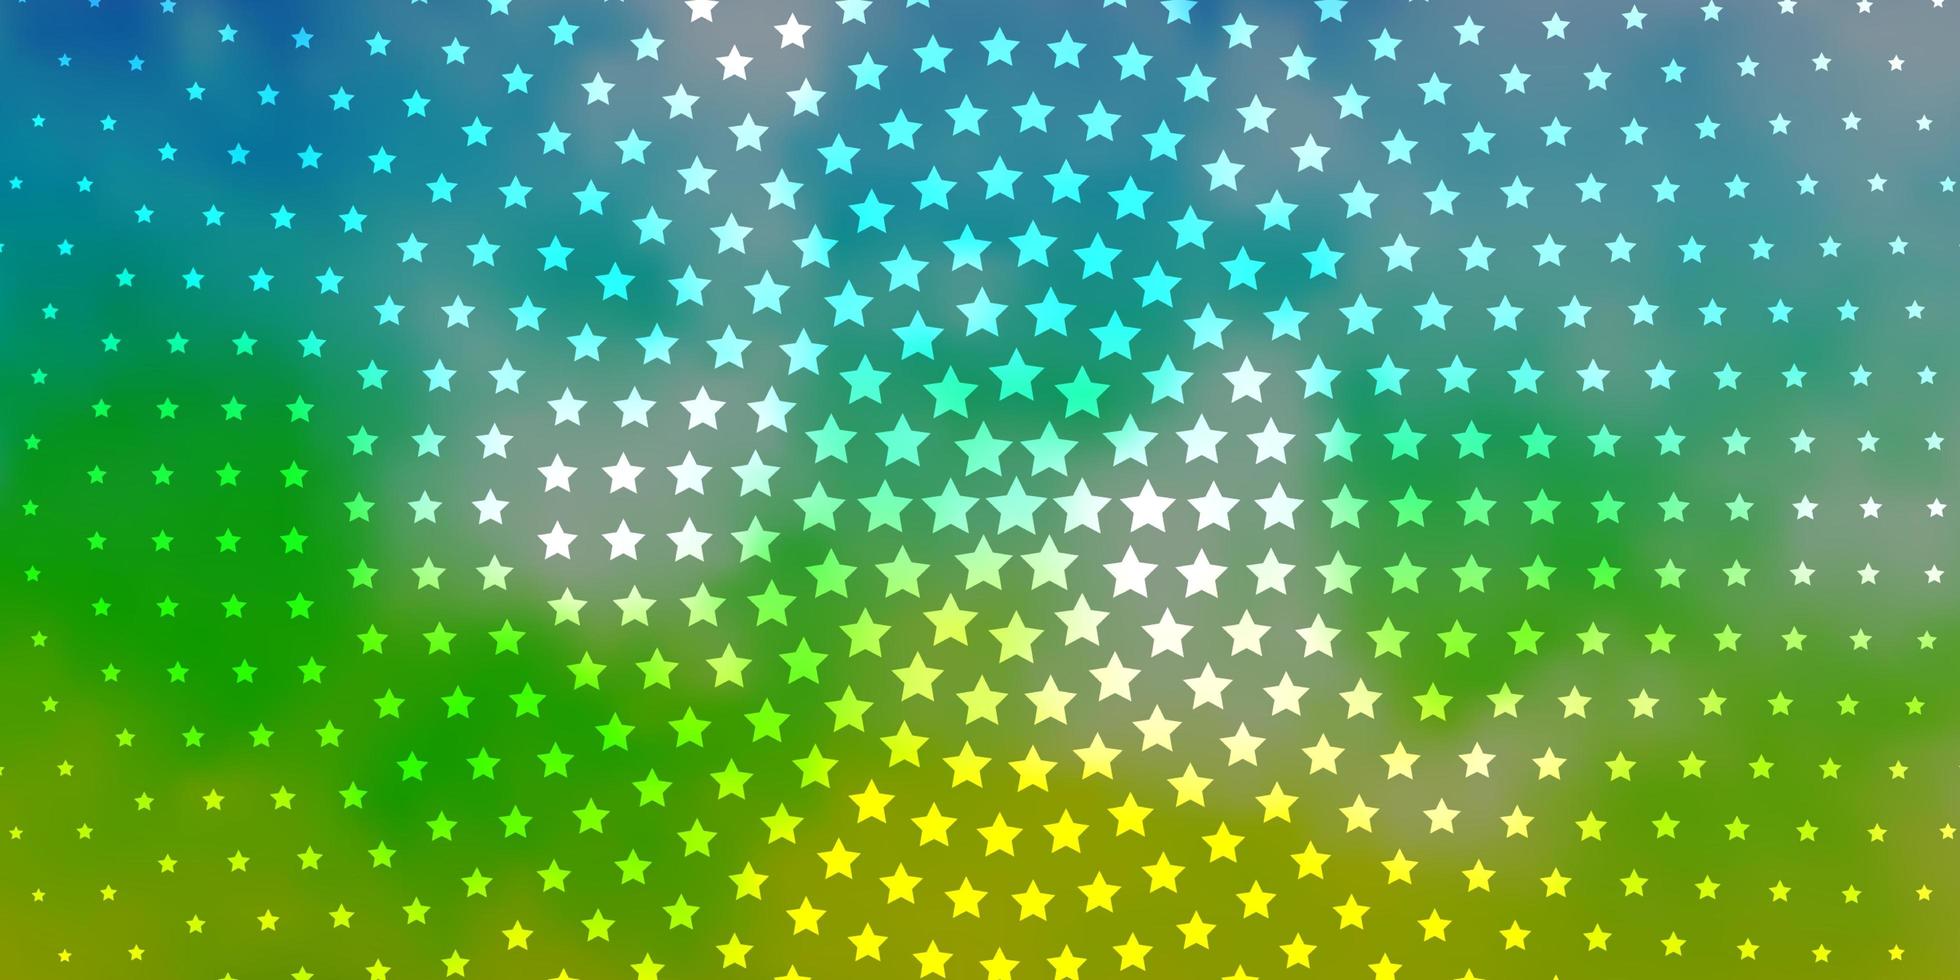 Light Multicolor vector template with neon stars. Colorful illustration with abstract gradient stars. Theme for cell phones.